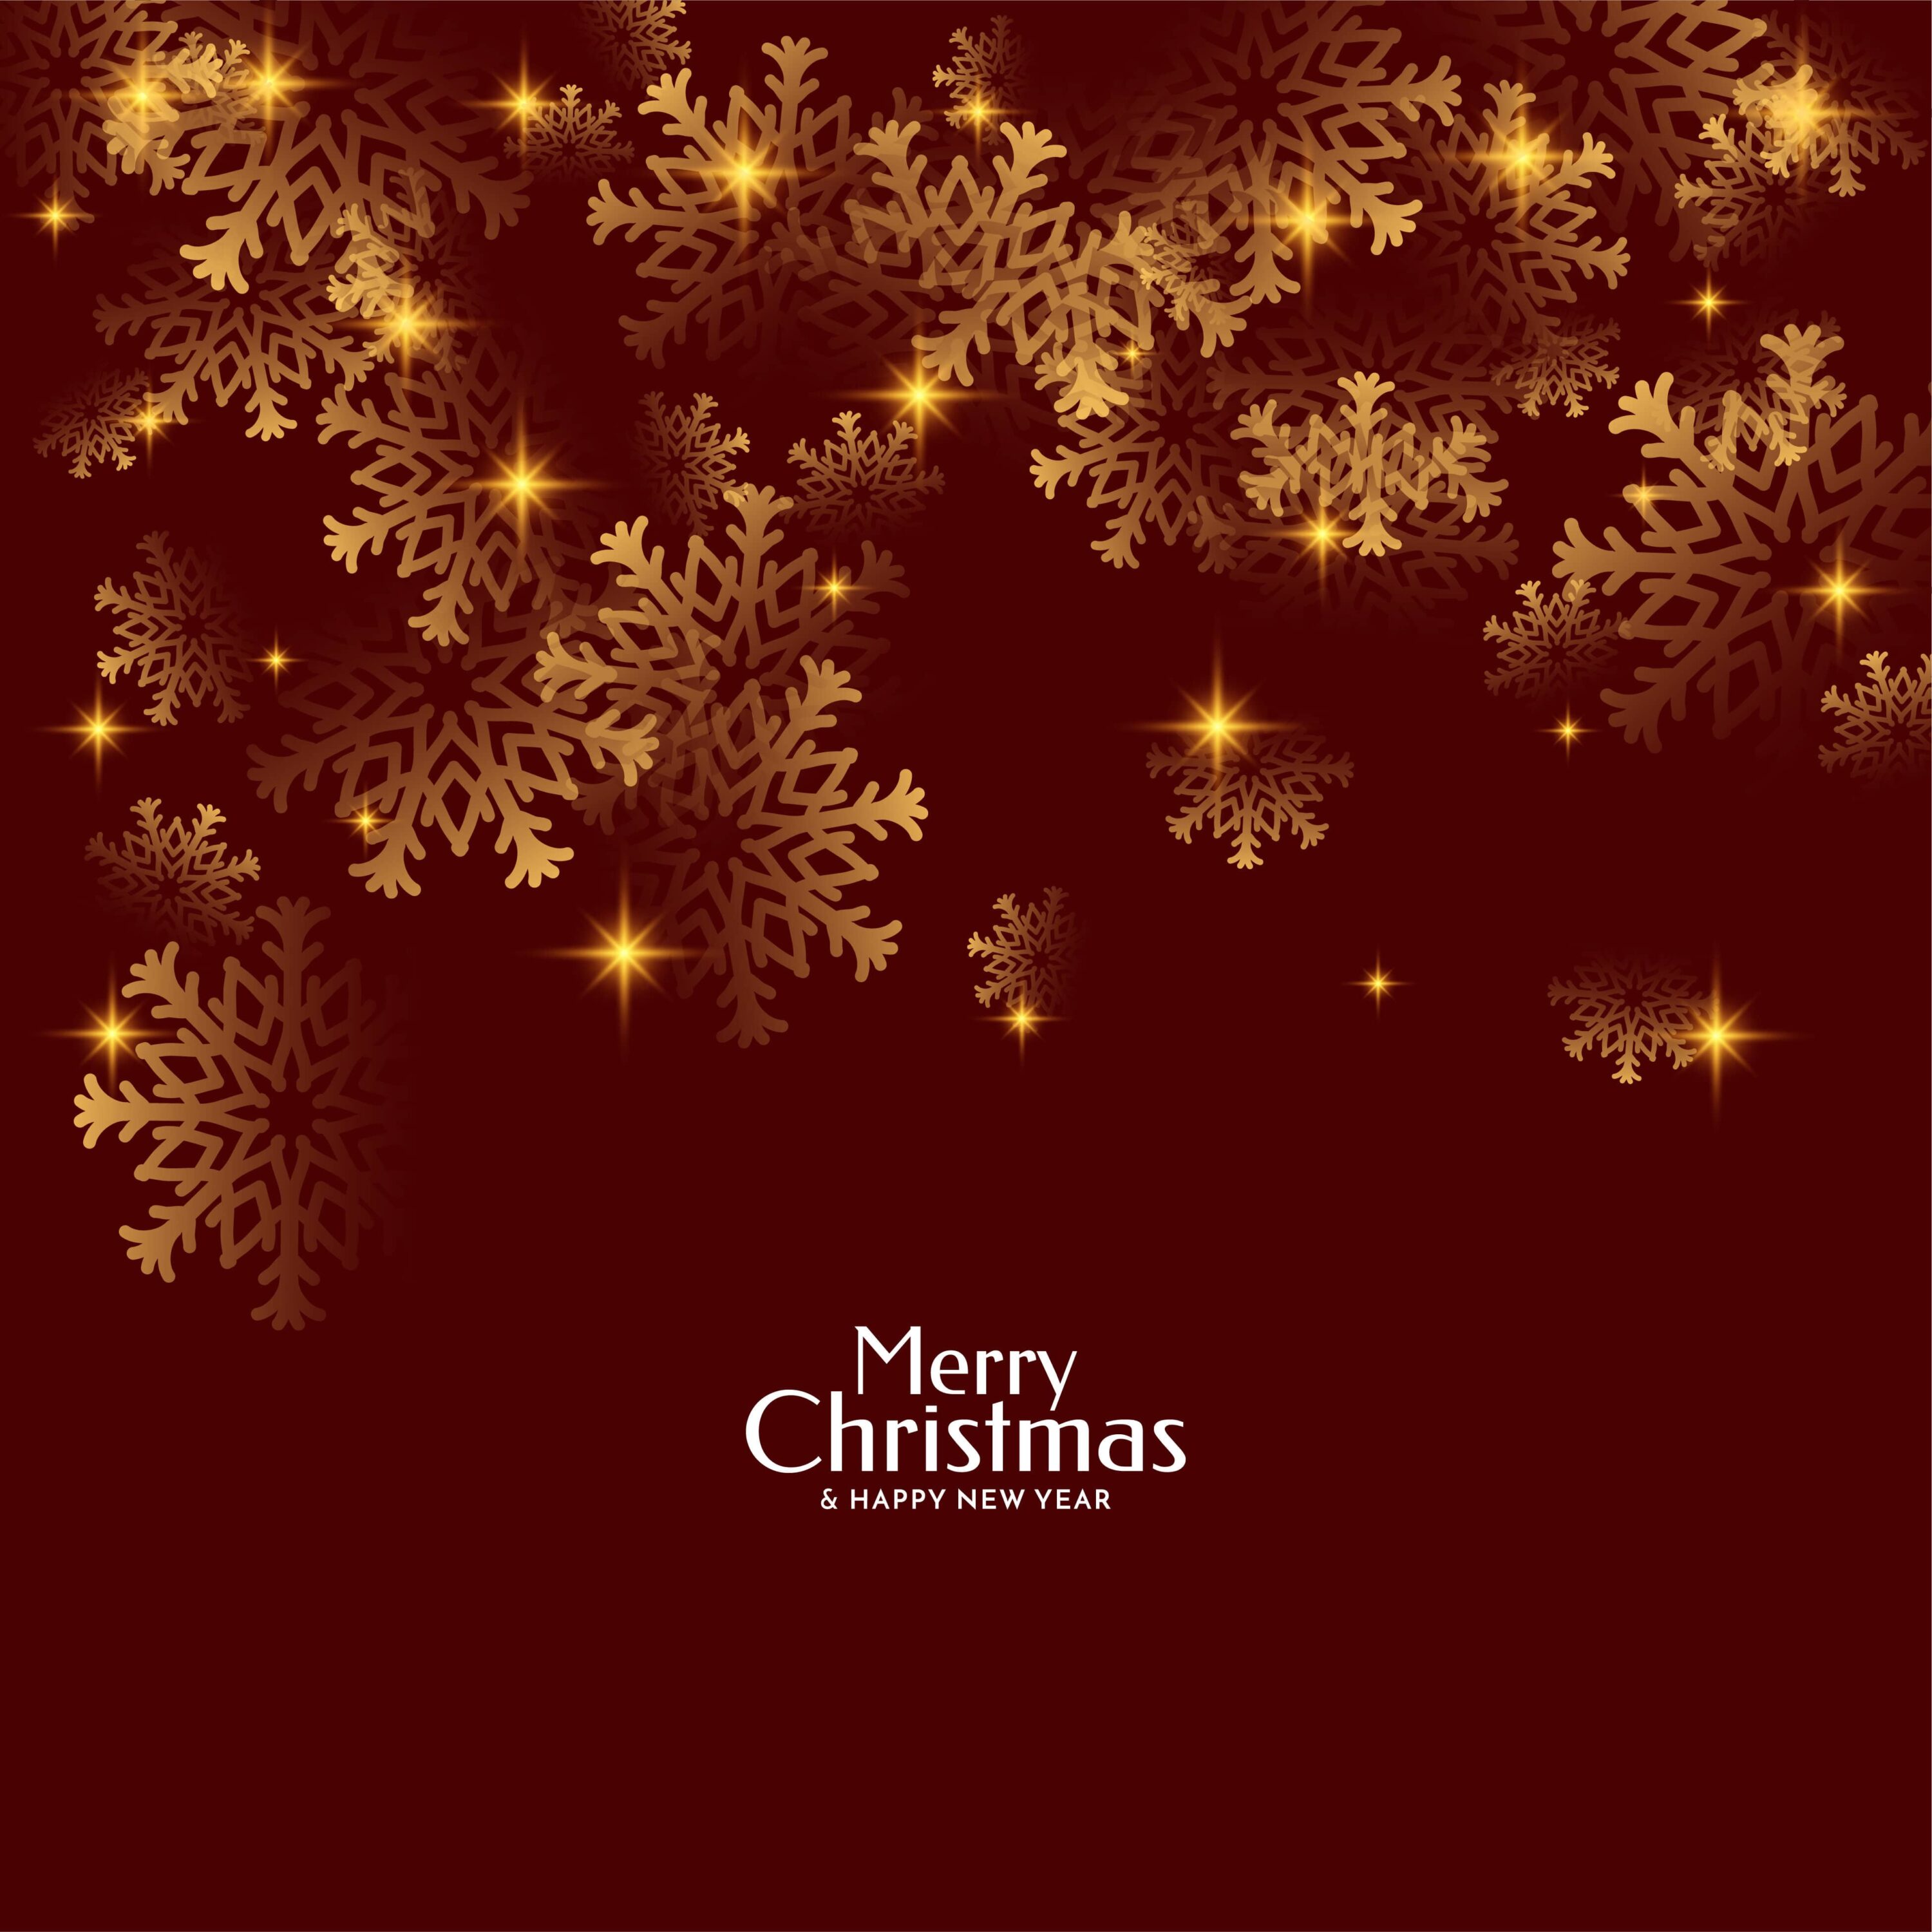 Merry Christmas Snowflake Backgrounds Design preview image.